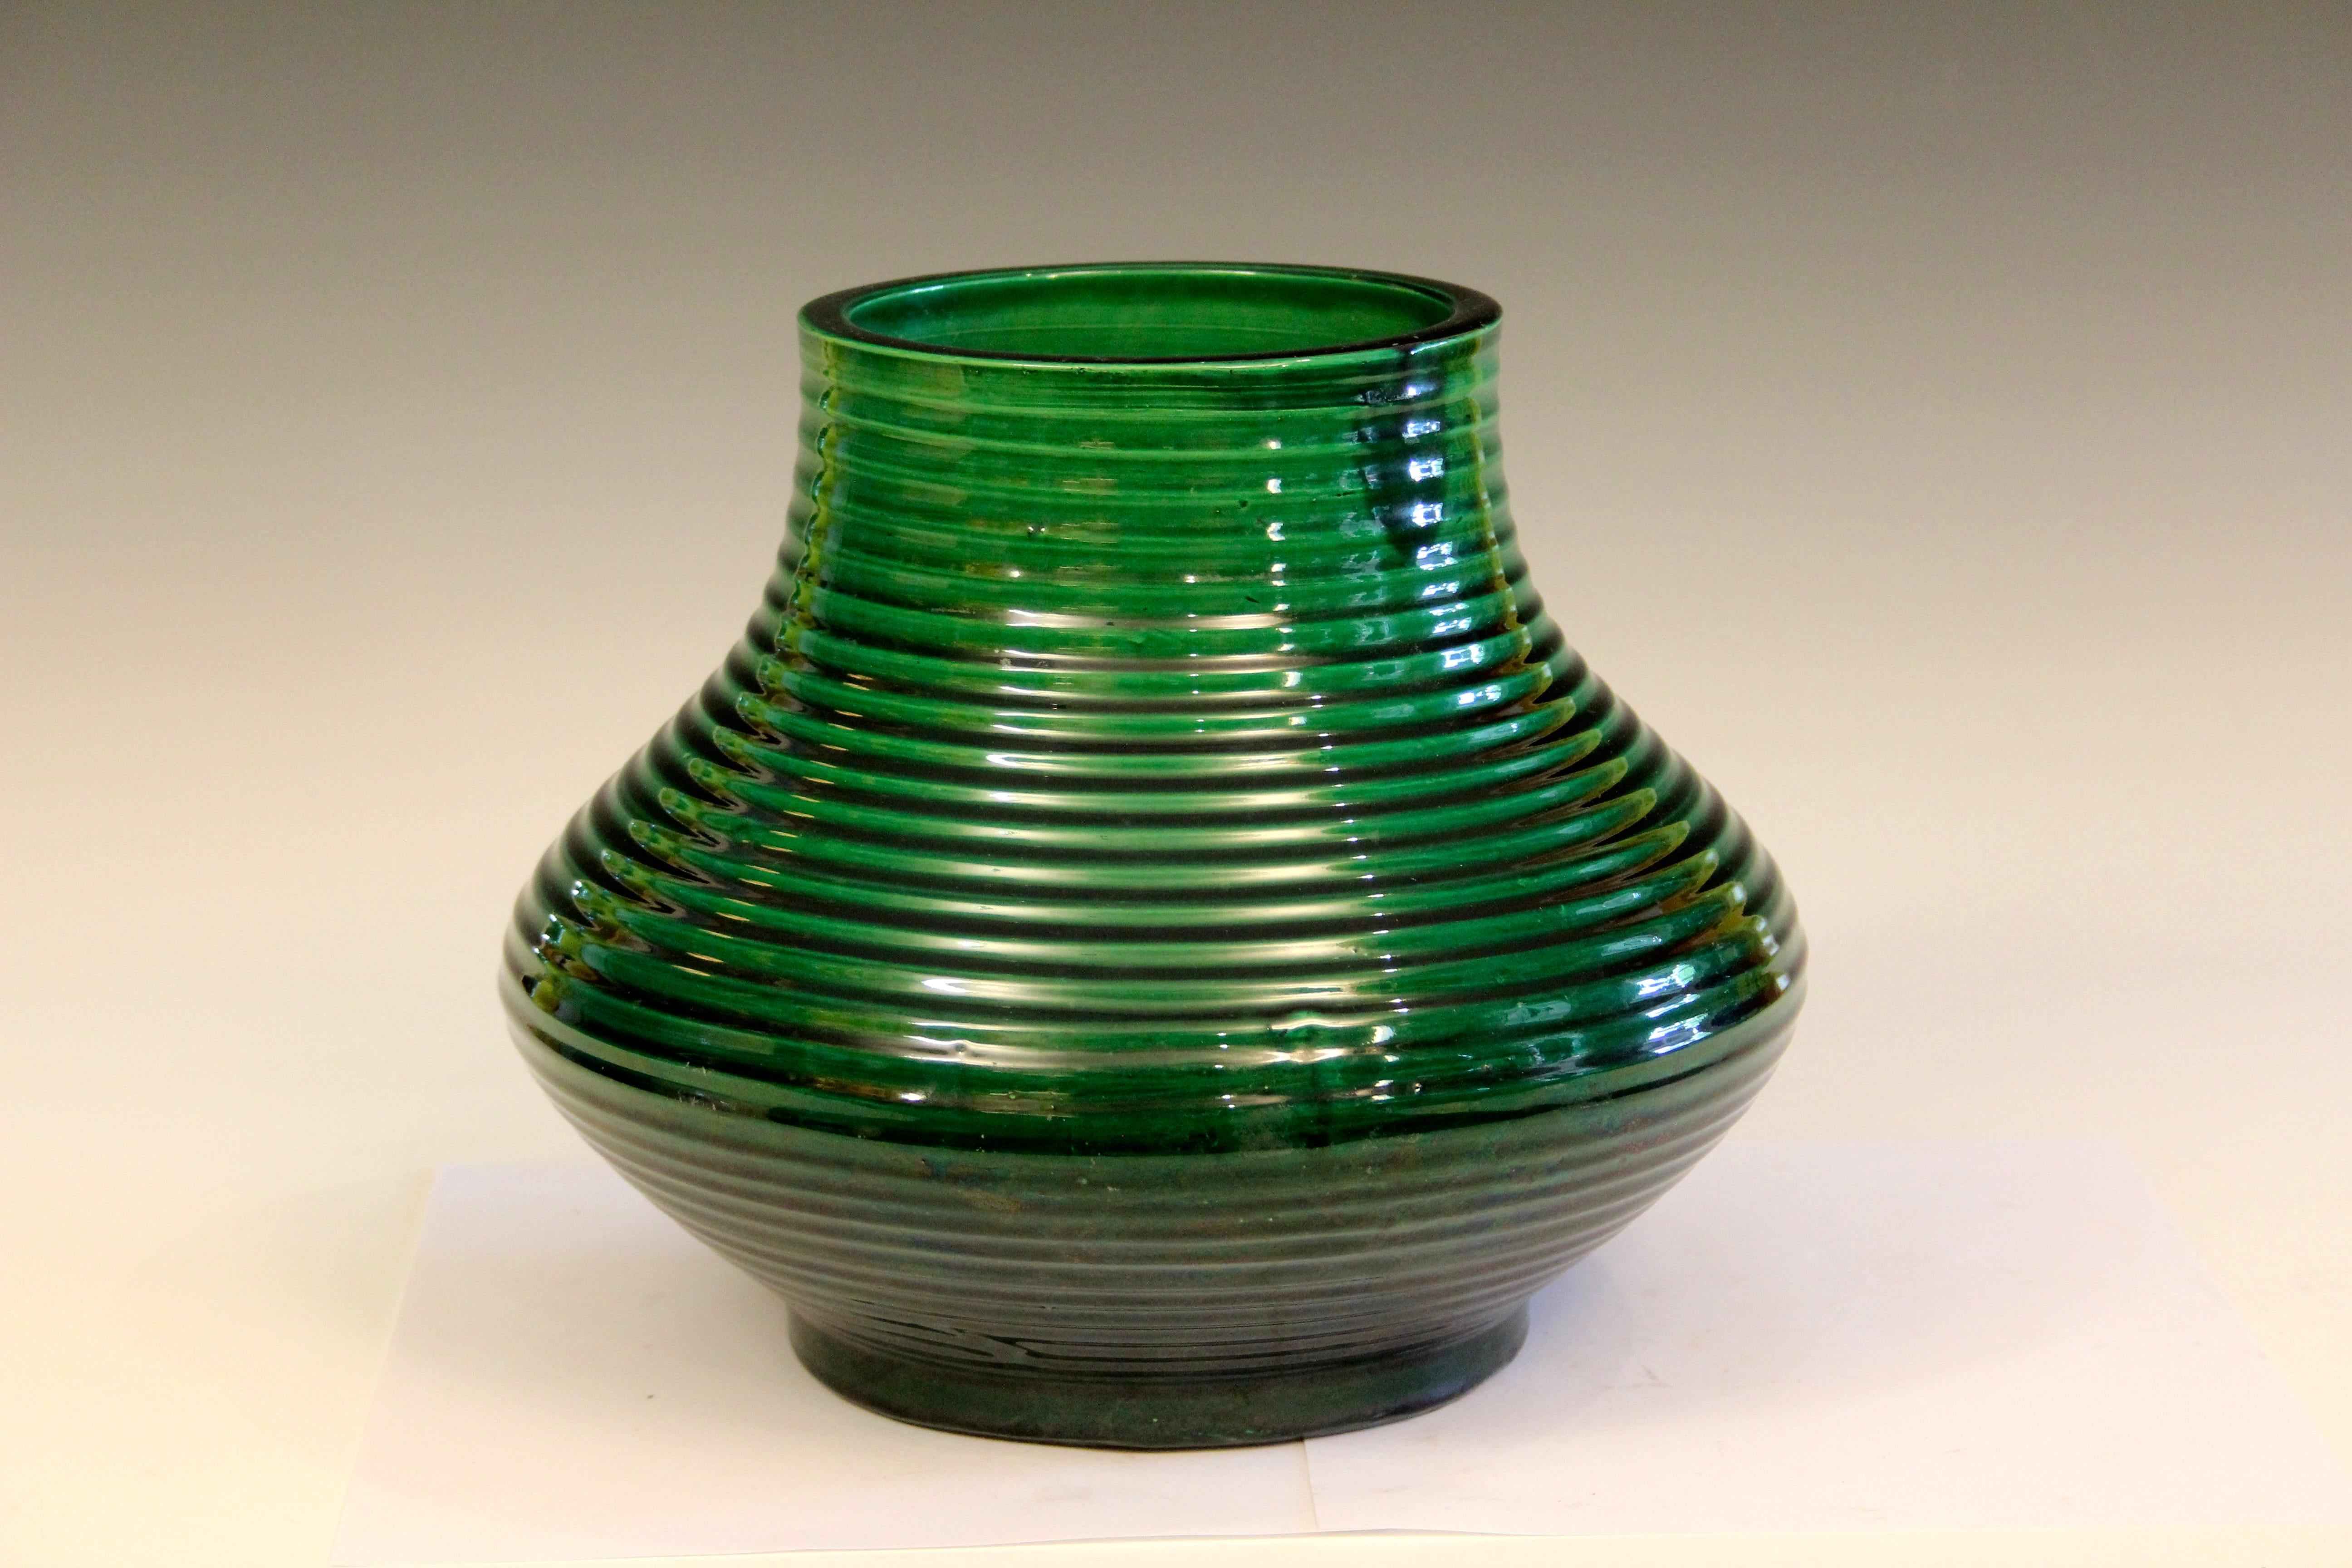 Antique Awaji pottery vase in Hu form with organic swirled grooves and great emerald green monochrome glaze, circa 1920. Measures: 9